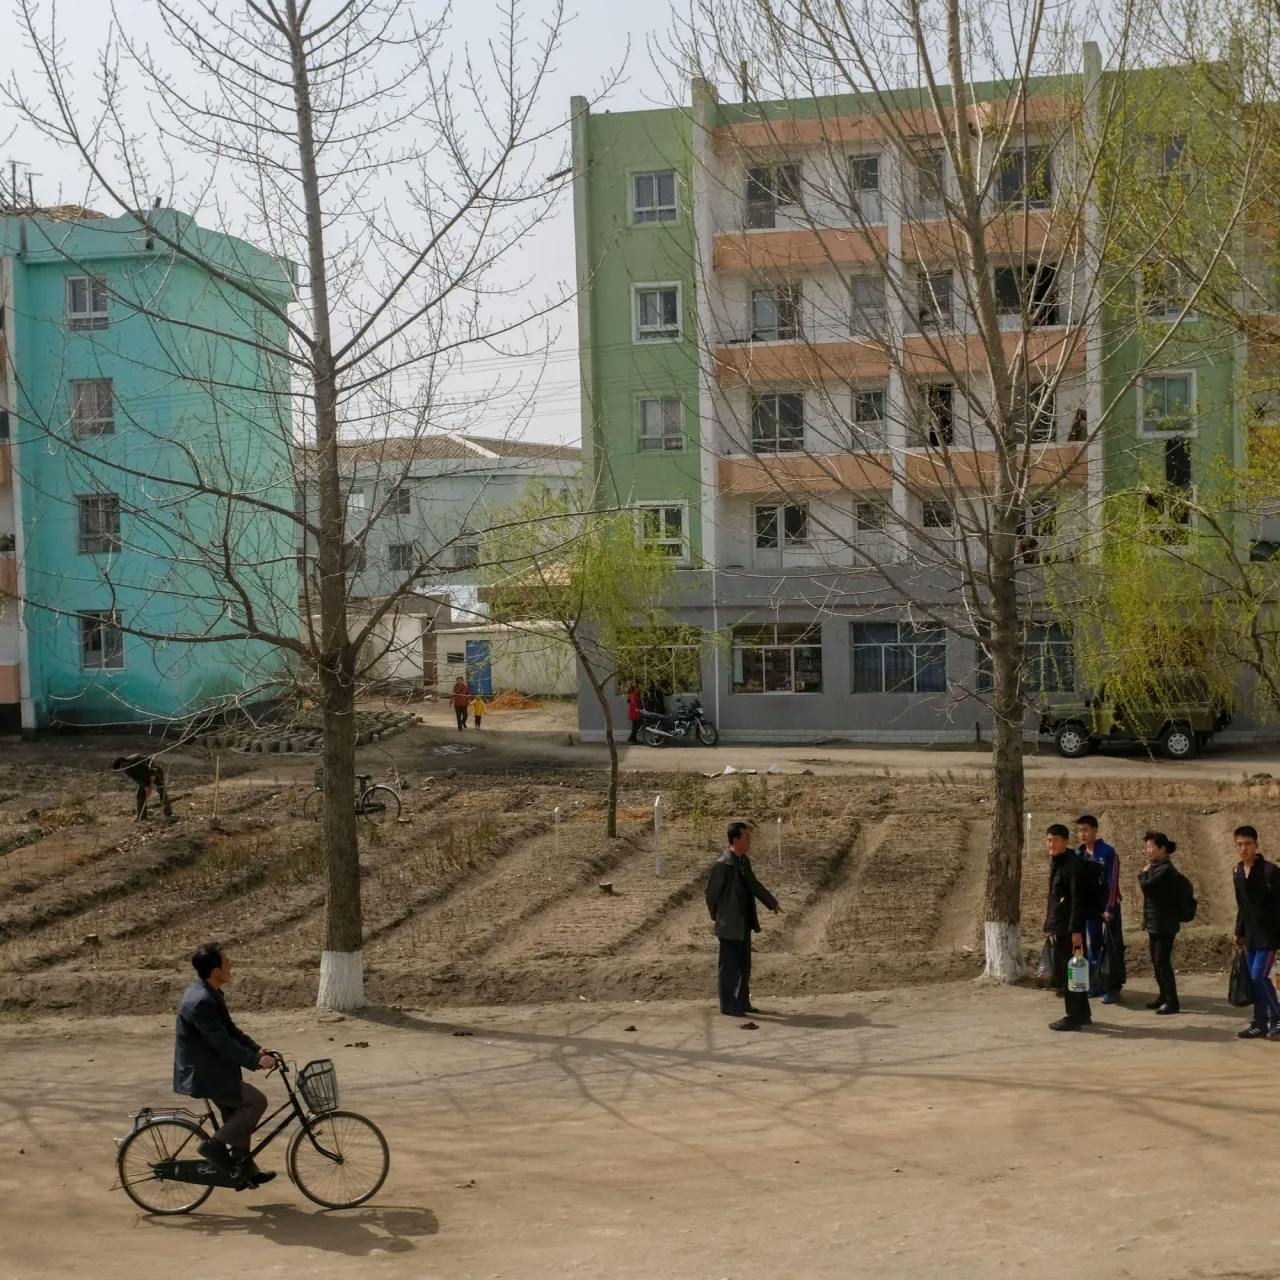 This is how most of the smaller towns and cities look Somewhere in Sinuiju